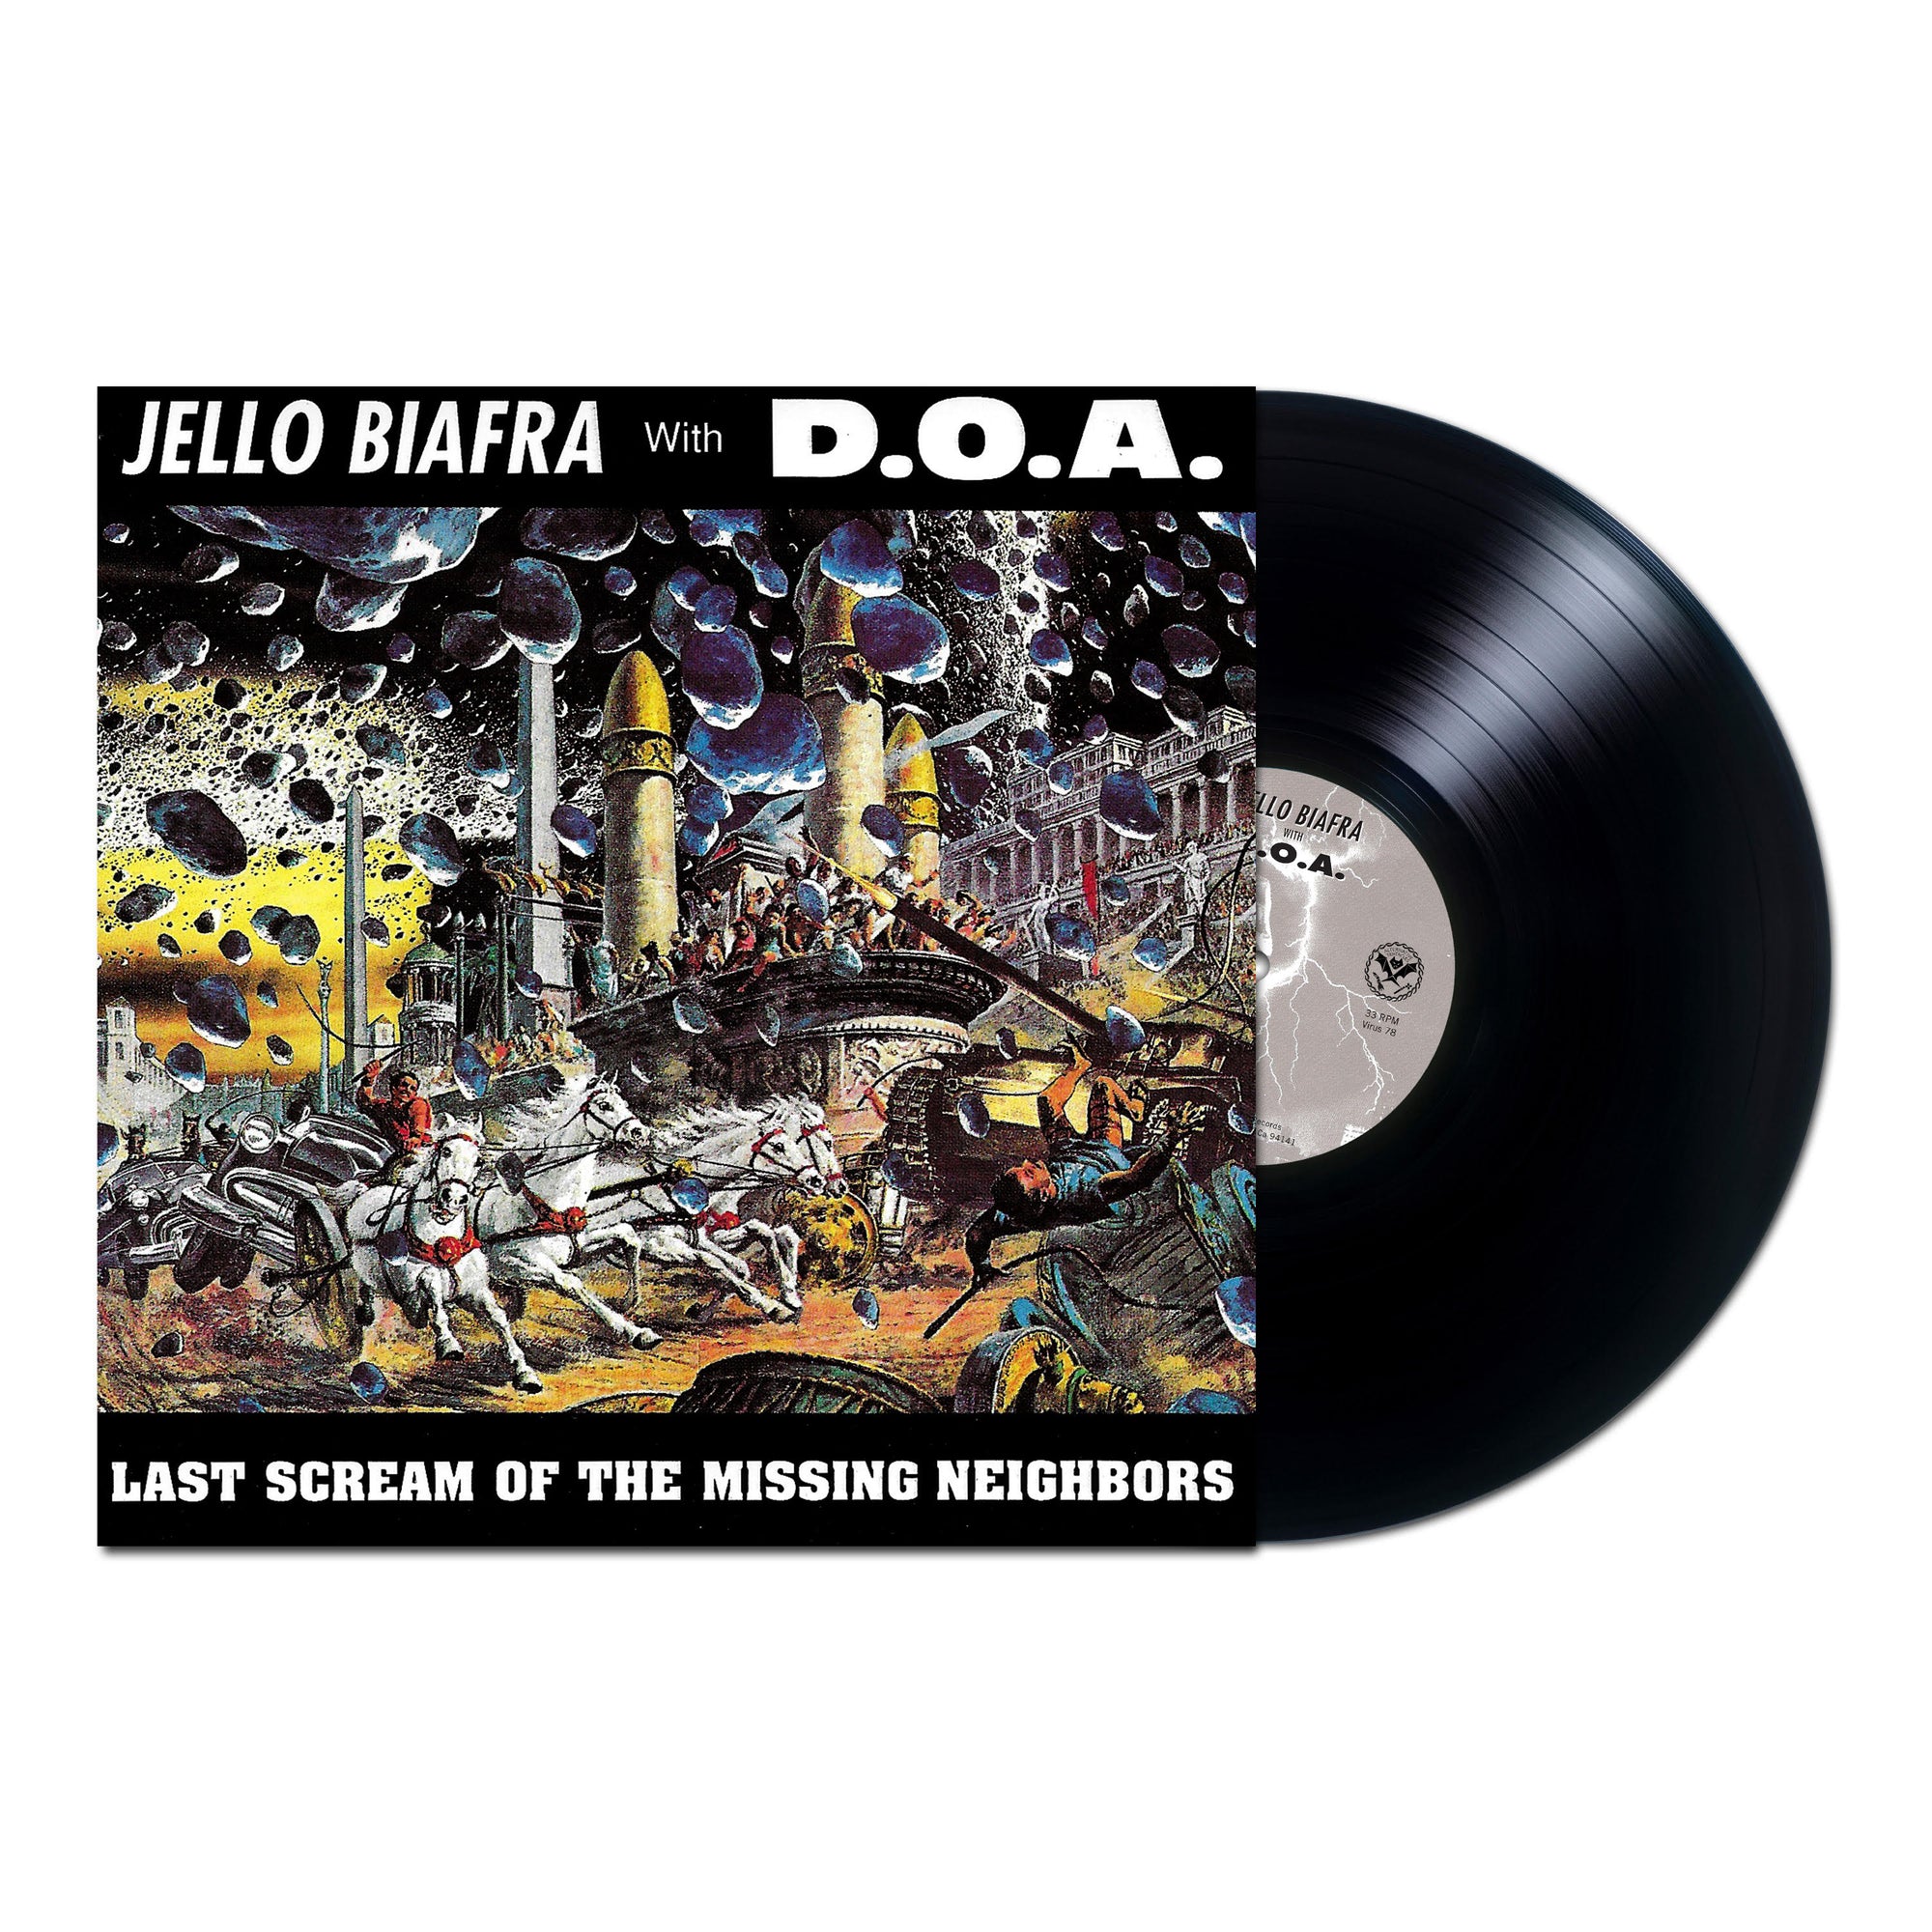 v078 - Jello Biafra With D.O.A.  - "Last Scream Of The Missing Neighbors" - Pre-Order